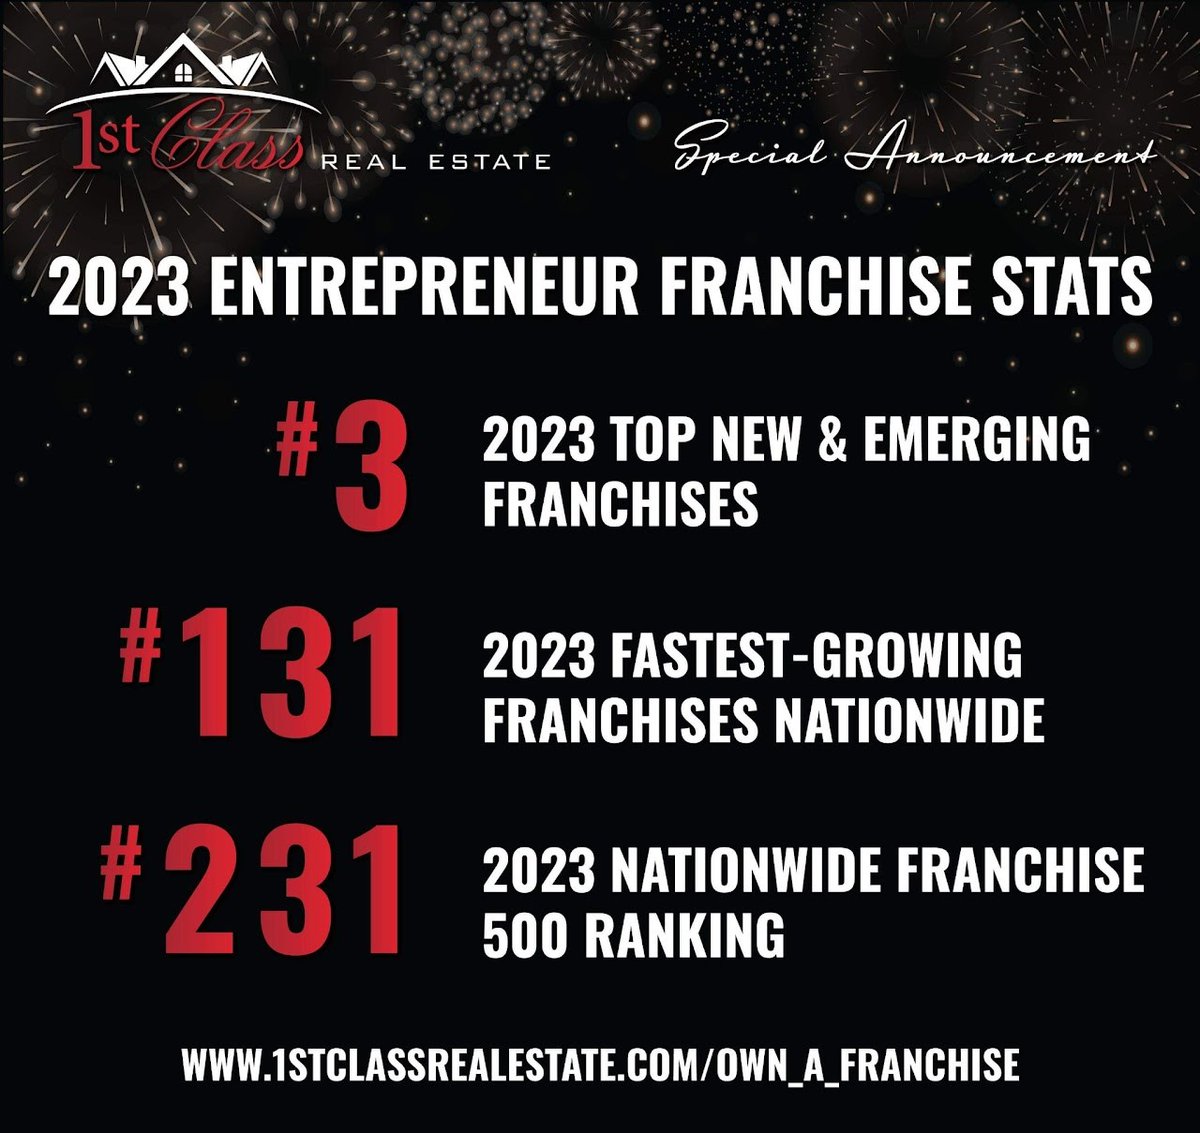 You don't want to miss out on an opportunity with these stats do you? Contact me today to learn more about what owning a 1st Class Real Estate franchise looks like. #1stclassrealestate #opportunity #newbusiness